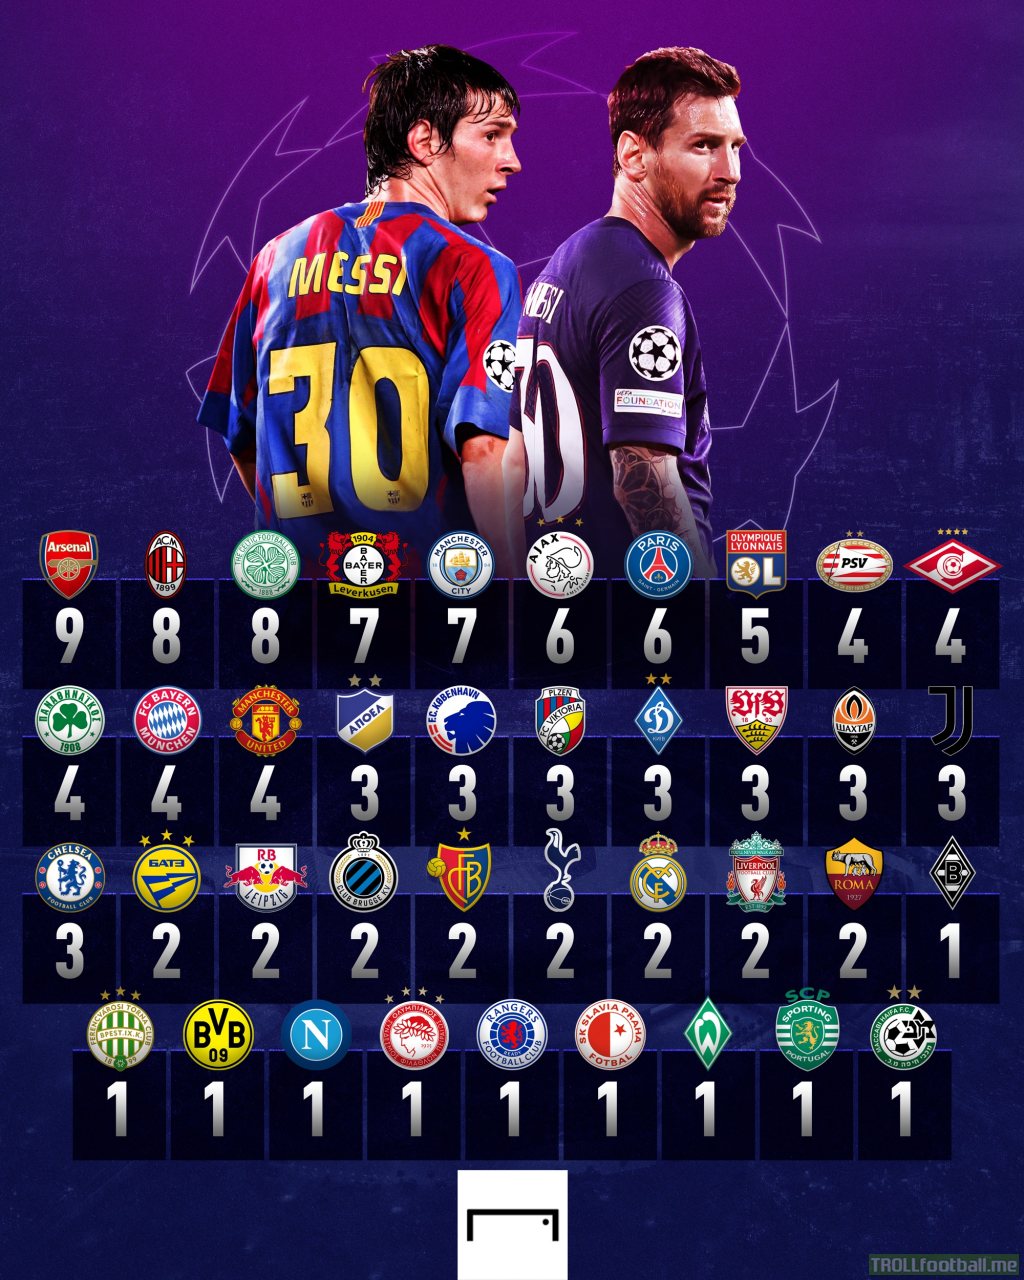 Lionel Messi's UCL goals by the 39 clubs he has scored against